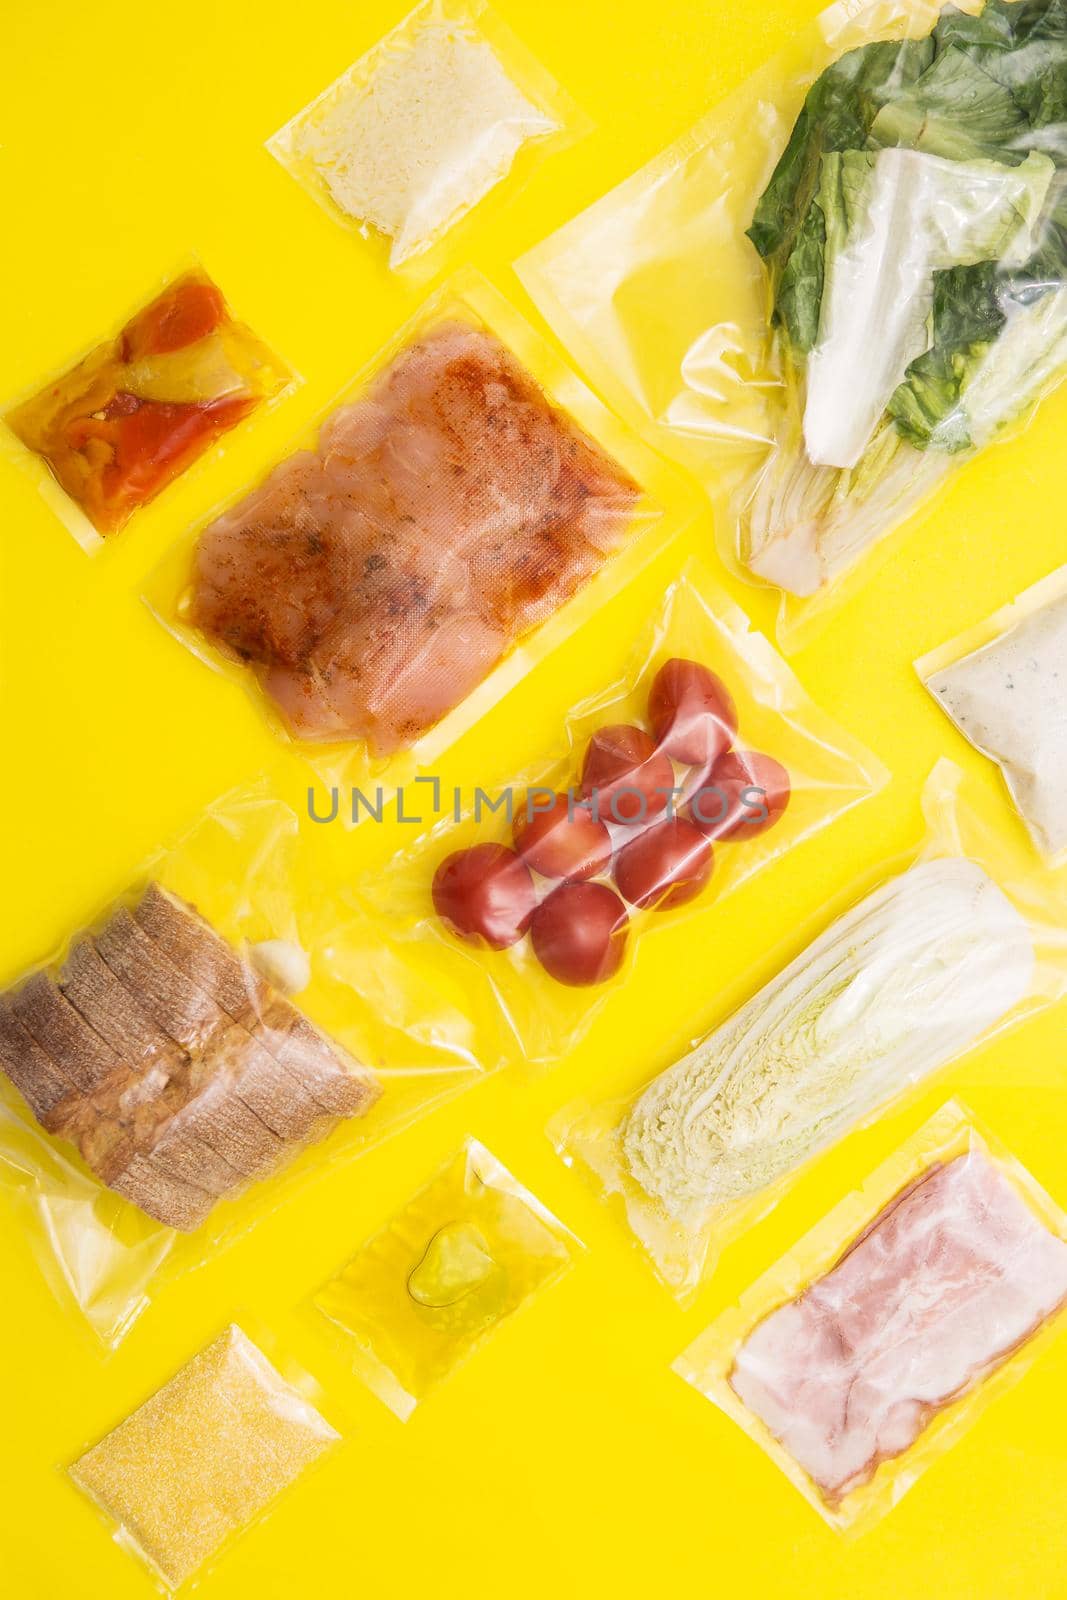 Hands holding bags of food. Salad dinner set: chicken, lettuce, tomatoes, peking cabbage, cheese, bacon, bread, olive oil sauces and spices. A set for delivering food for dinner on yellow background. I cook at home.